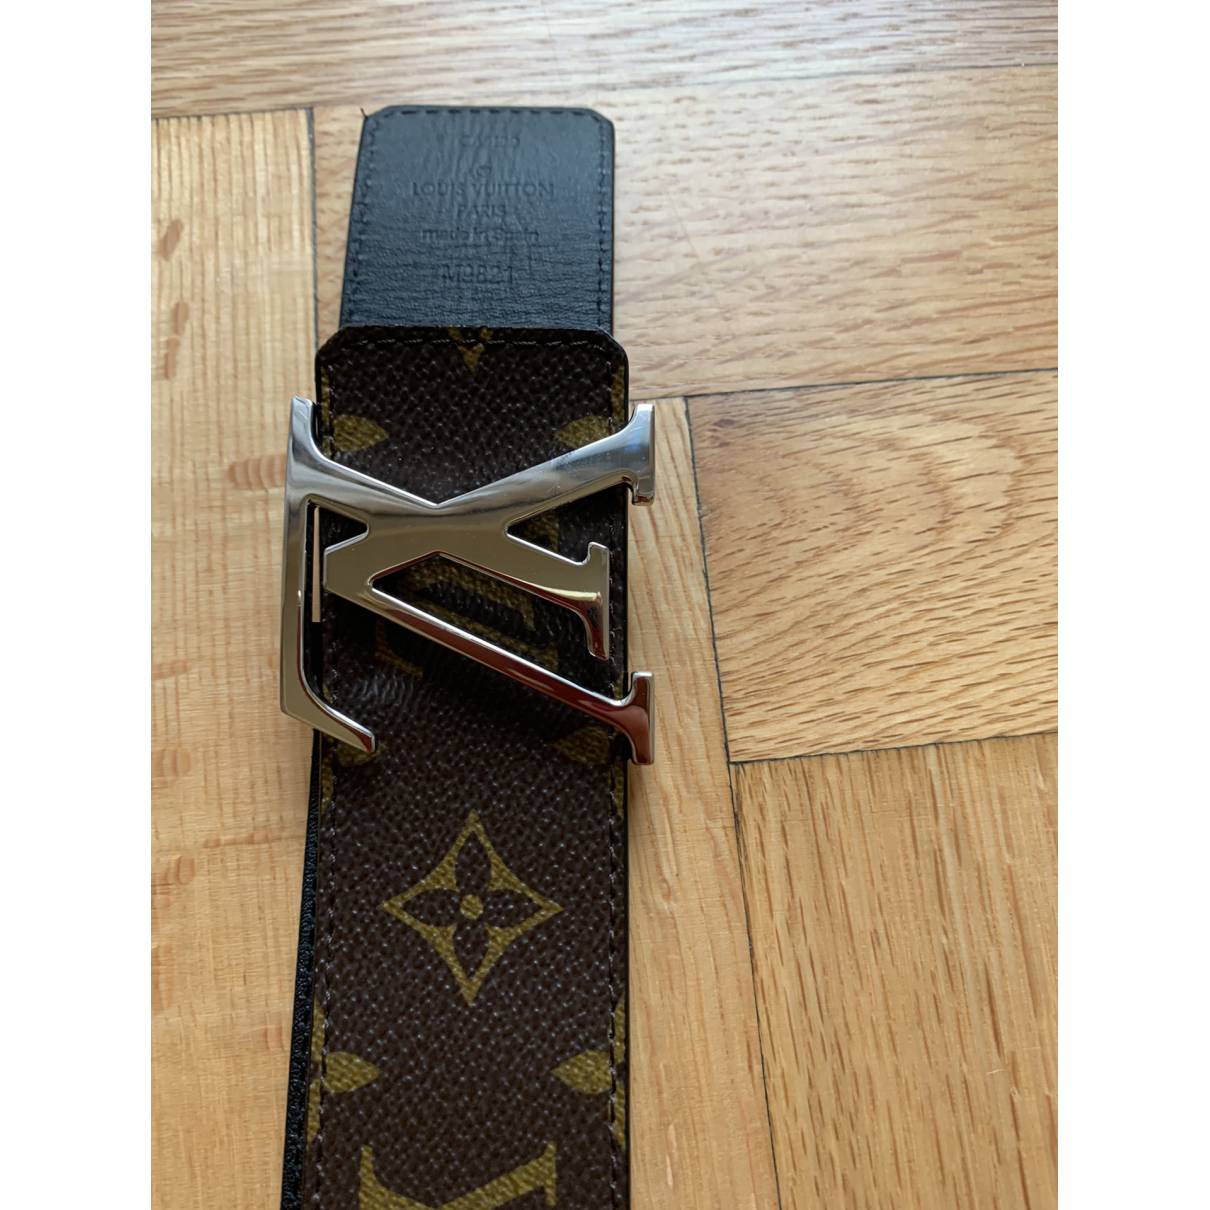 Initiales leather belt Louis Vuitton Brown size 100 cm in Leather - 33742492